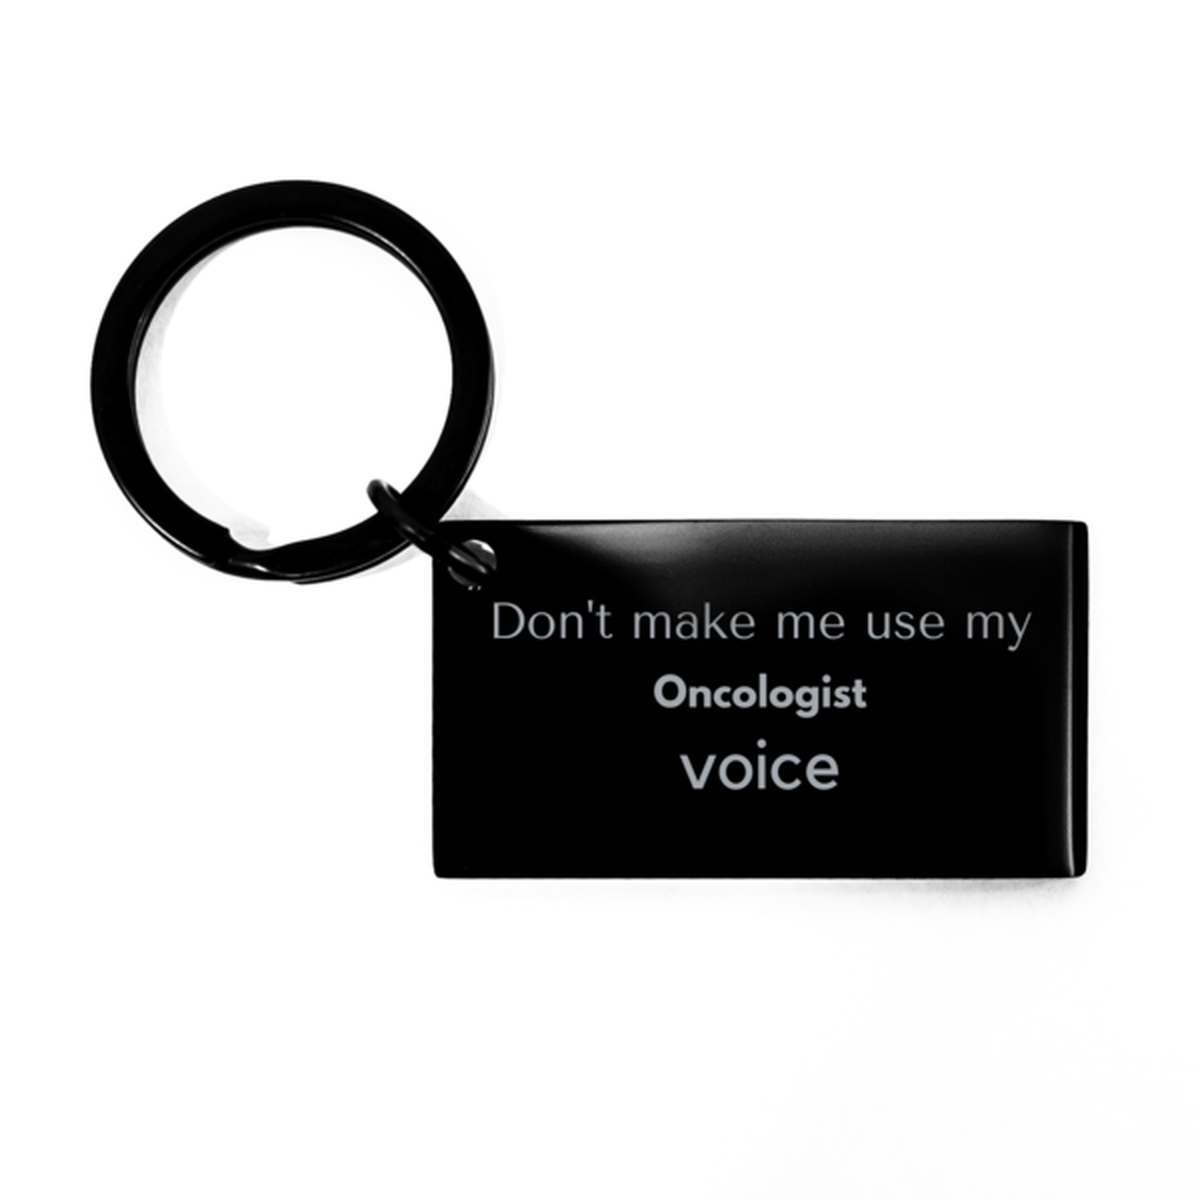 Don't make me use my Oncologist voice, Sarcasm Oncologist Gifts, Christmas Oncologist Keychain Birthday Unique Gifts For Oncologist Coworkers, Men, Women, Colleague, Friends